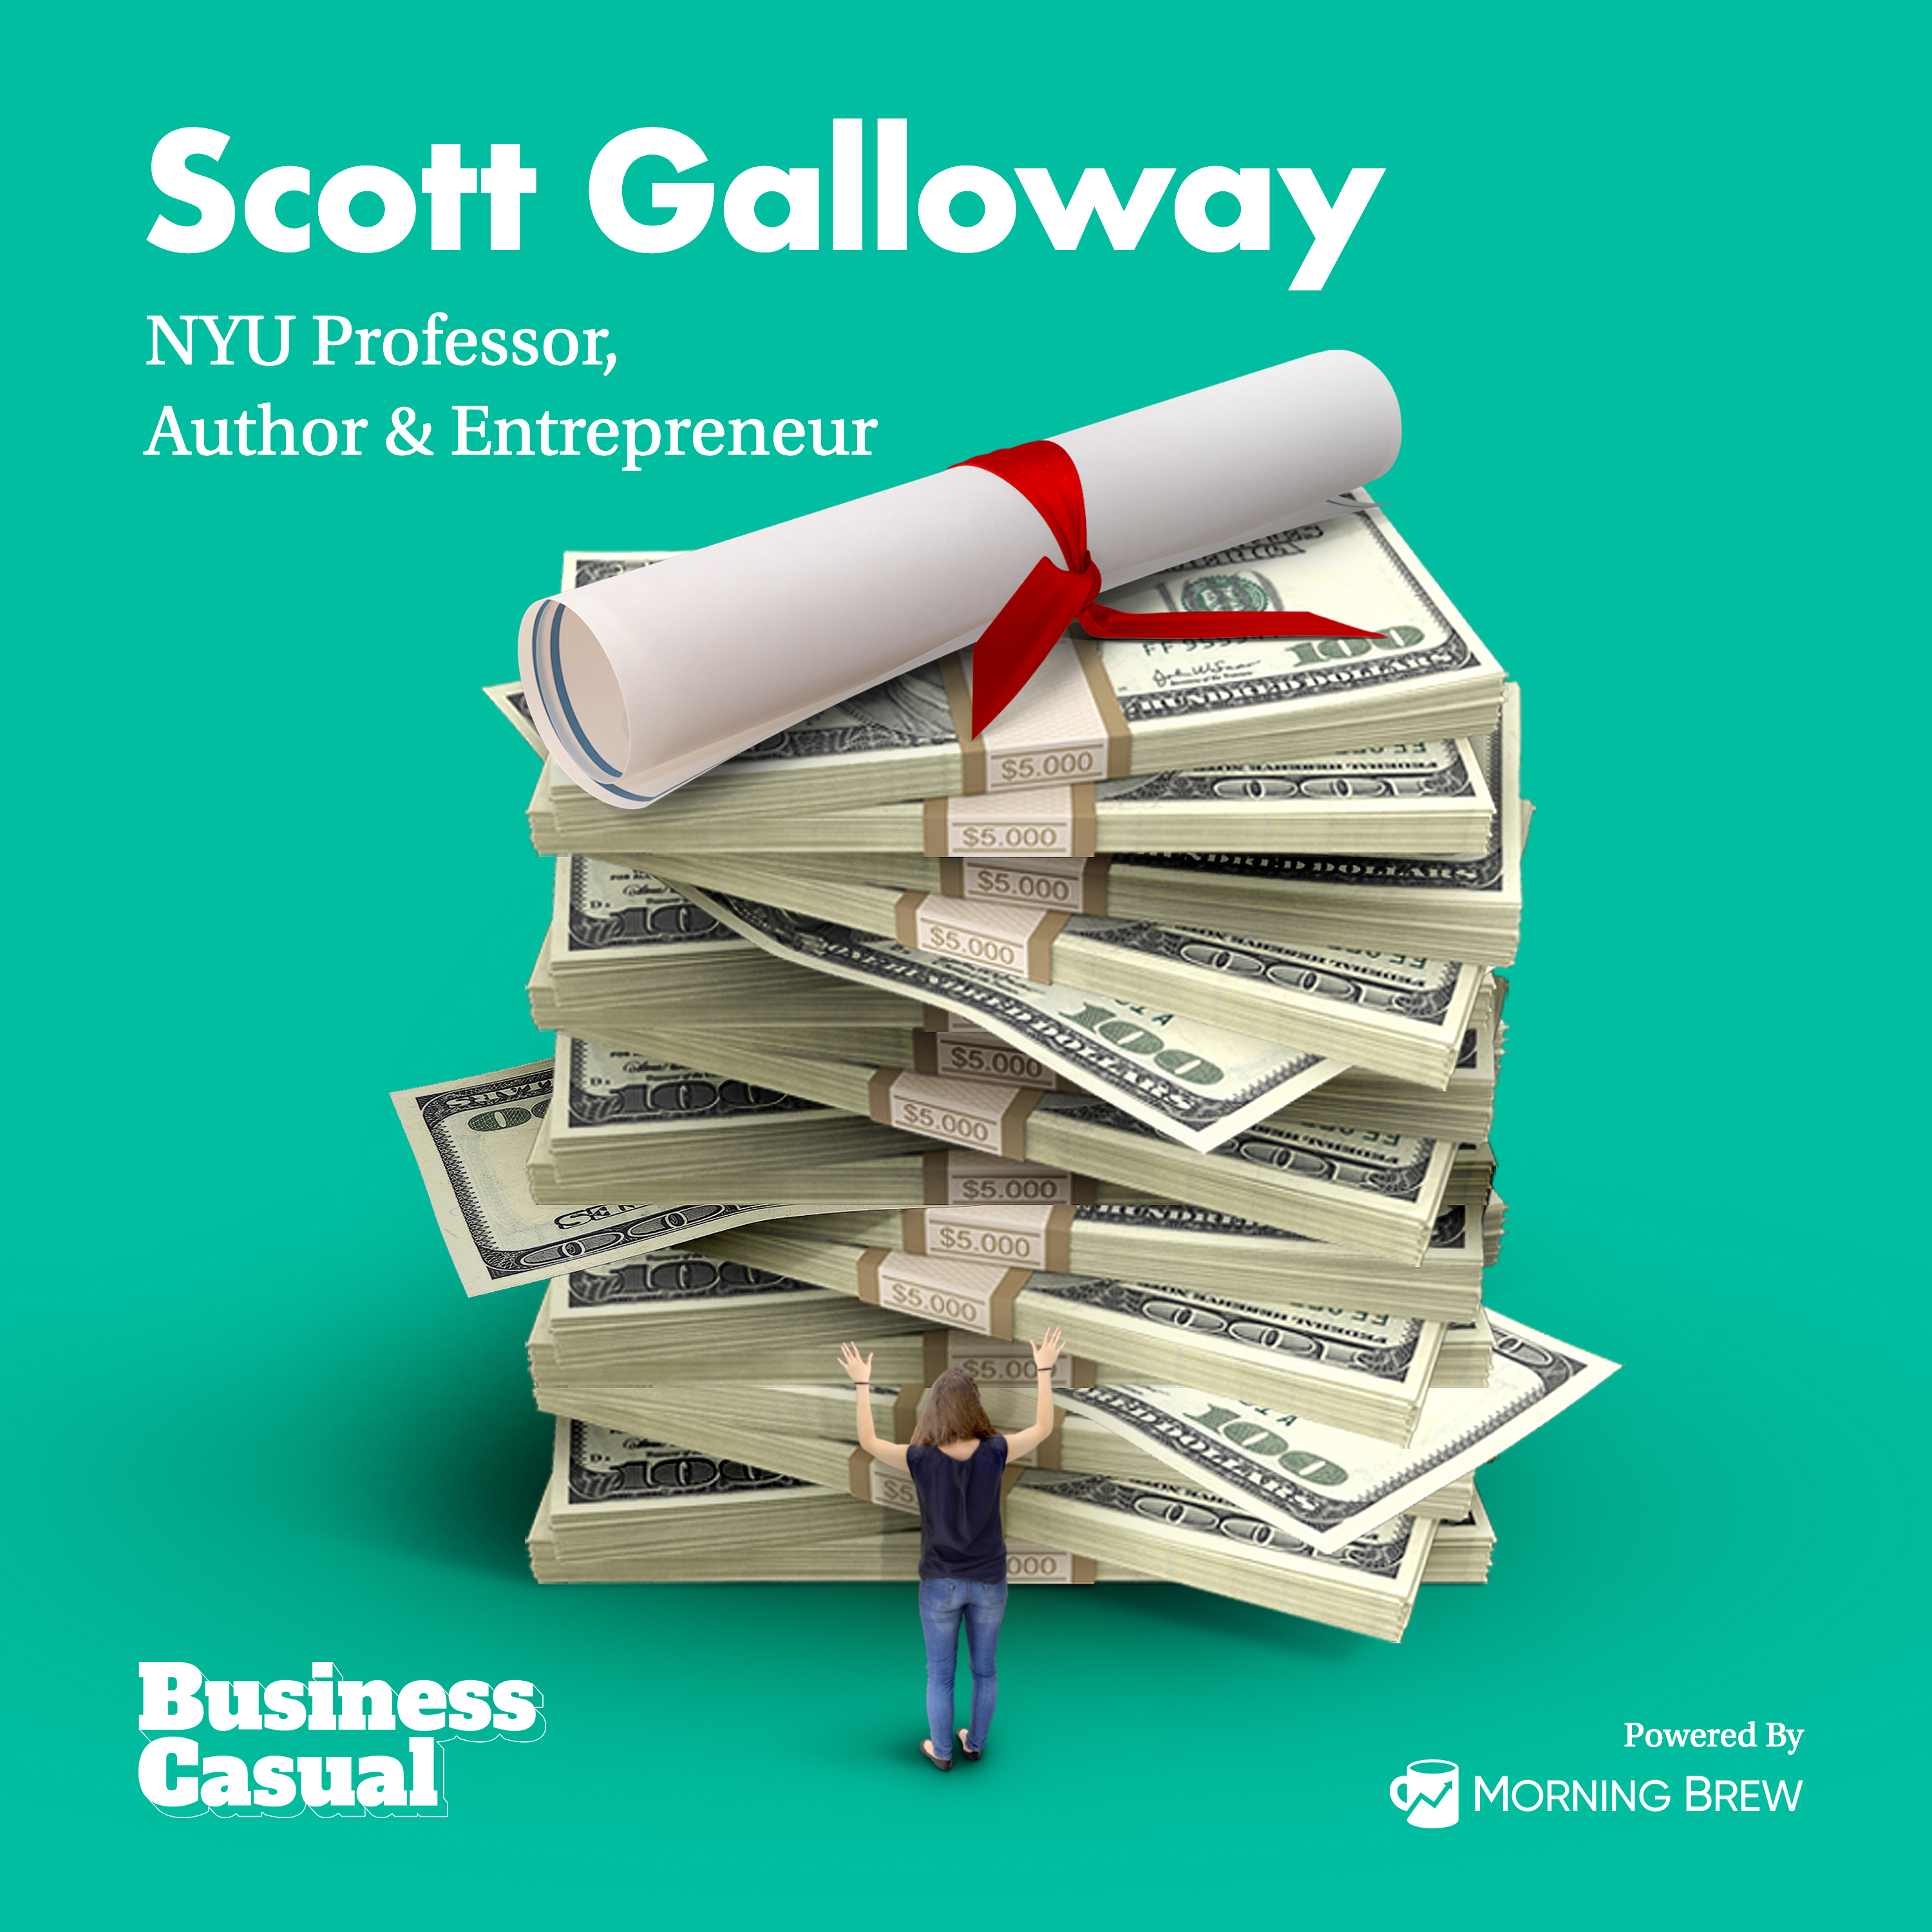 We woke up in dystopia: Scott Galloway on higher education’s biggest failures Image